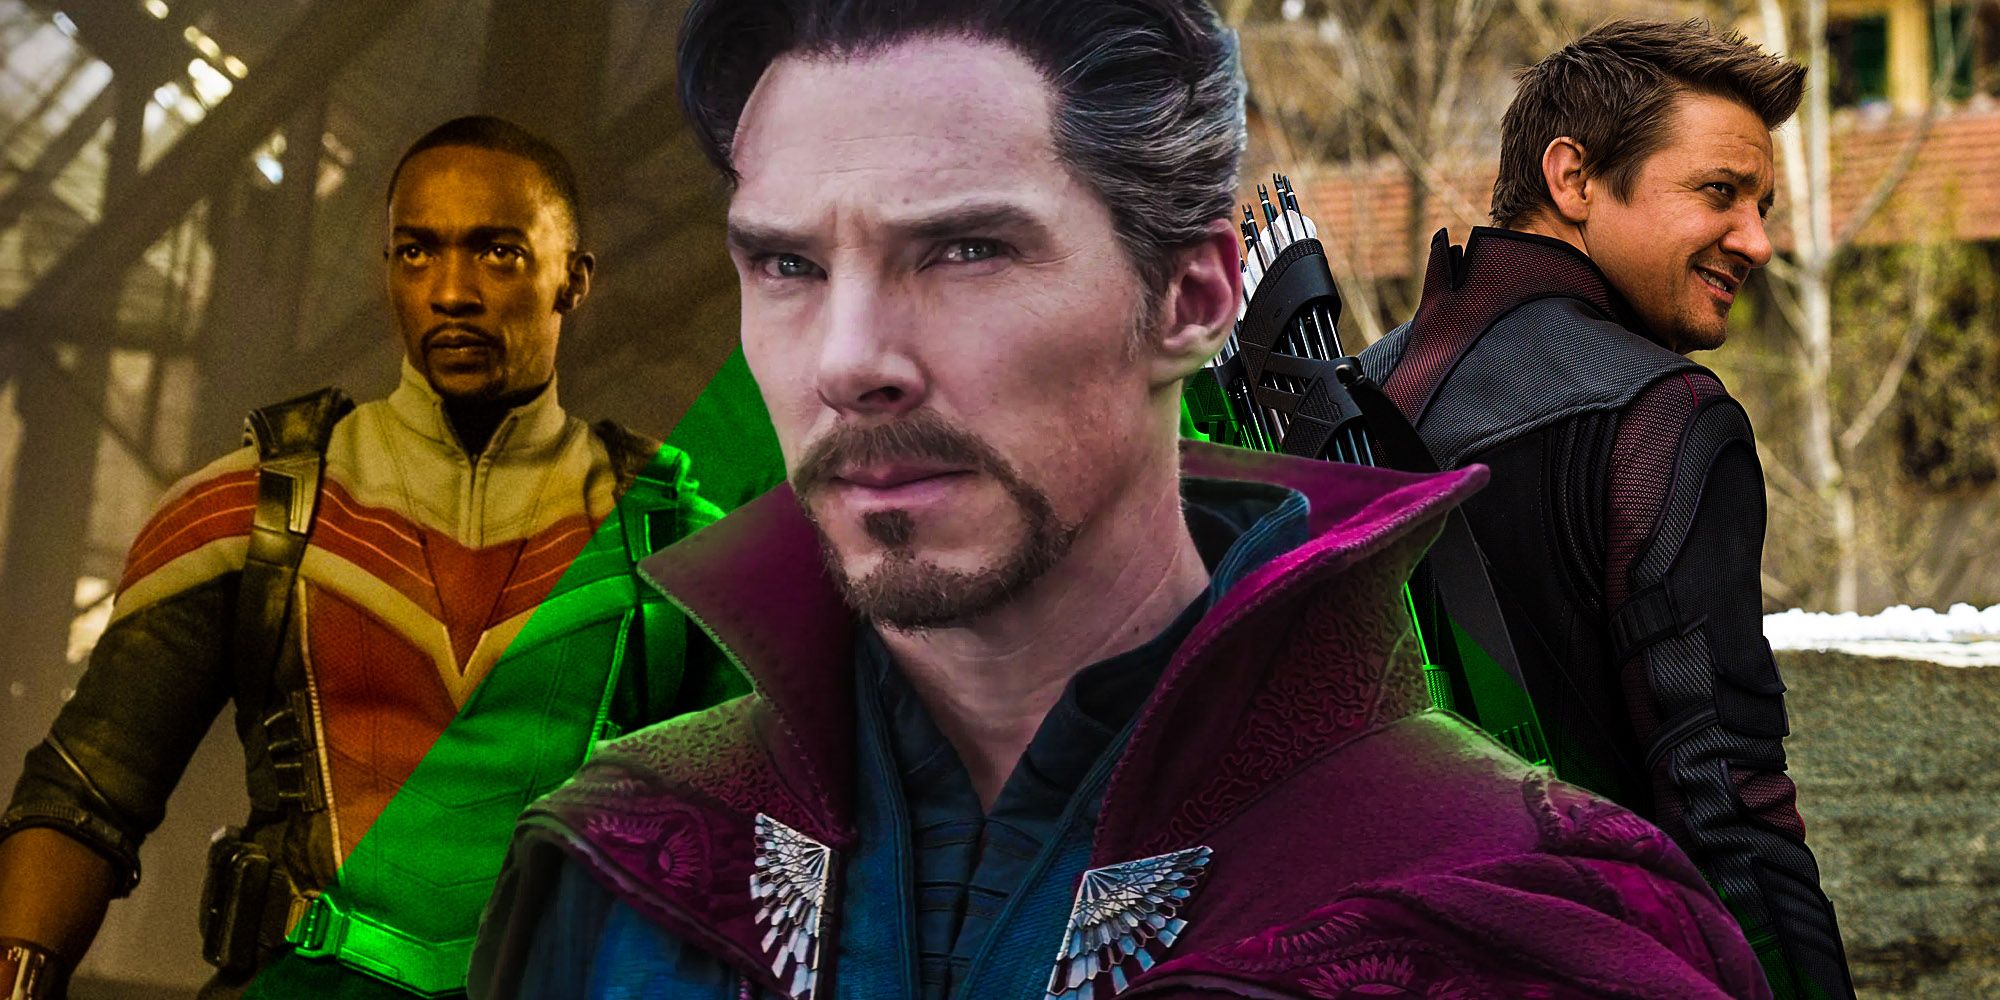 Doctor Strange, Sam Wilson and Hawkeye as popular MCU character who did not feature in WandaVision.